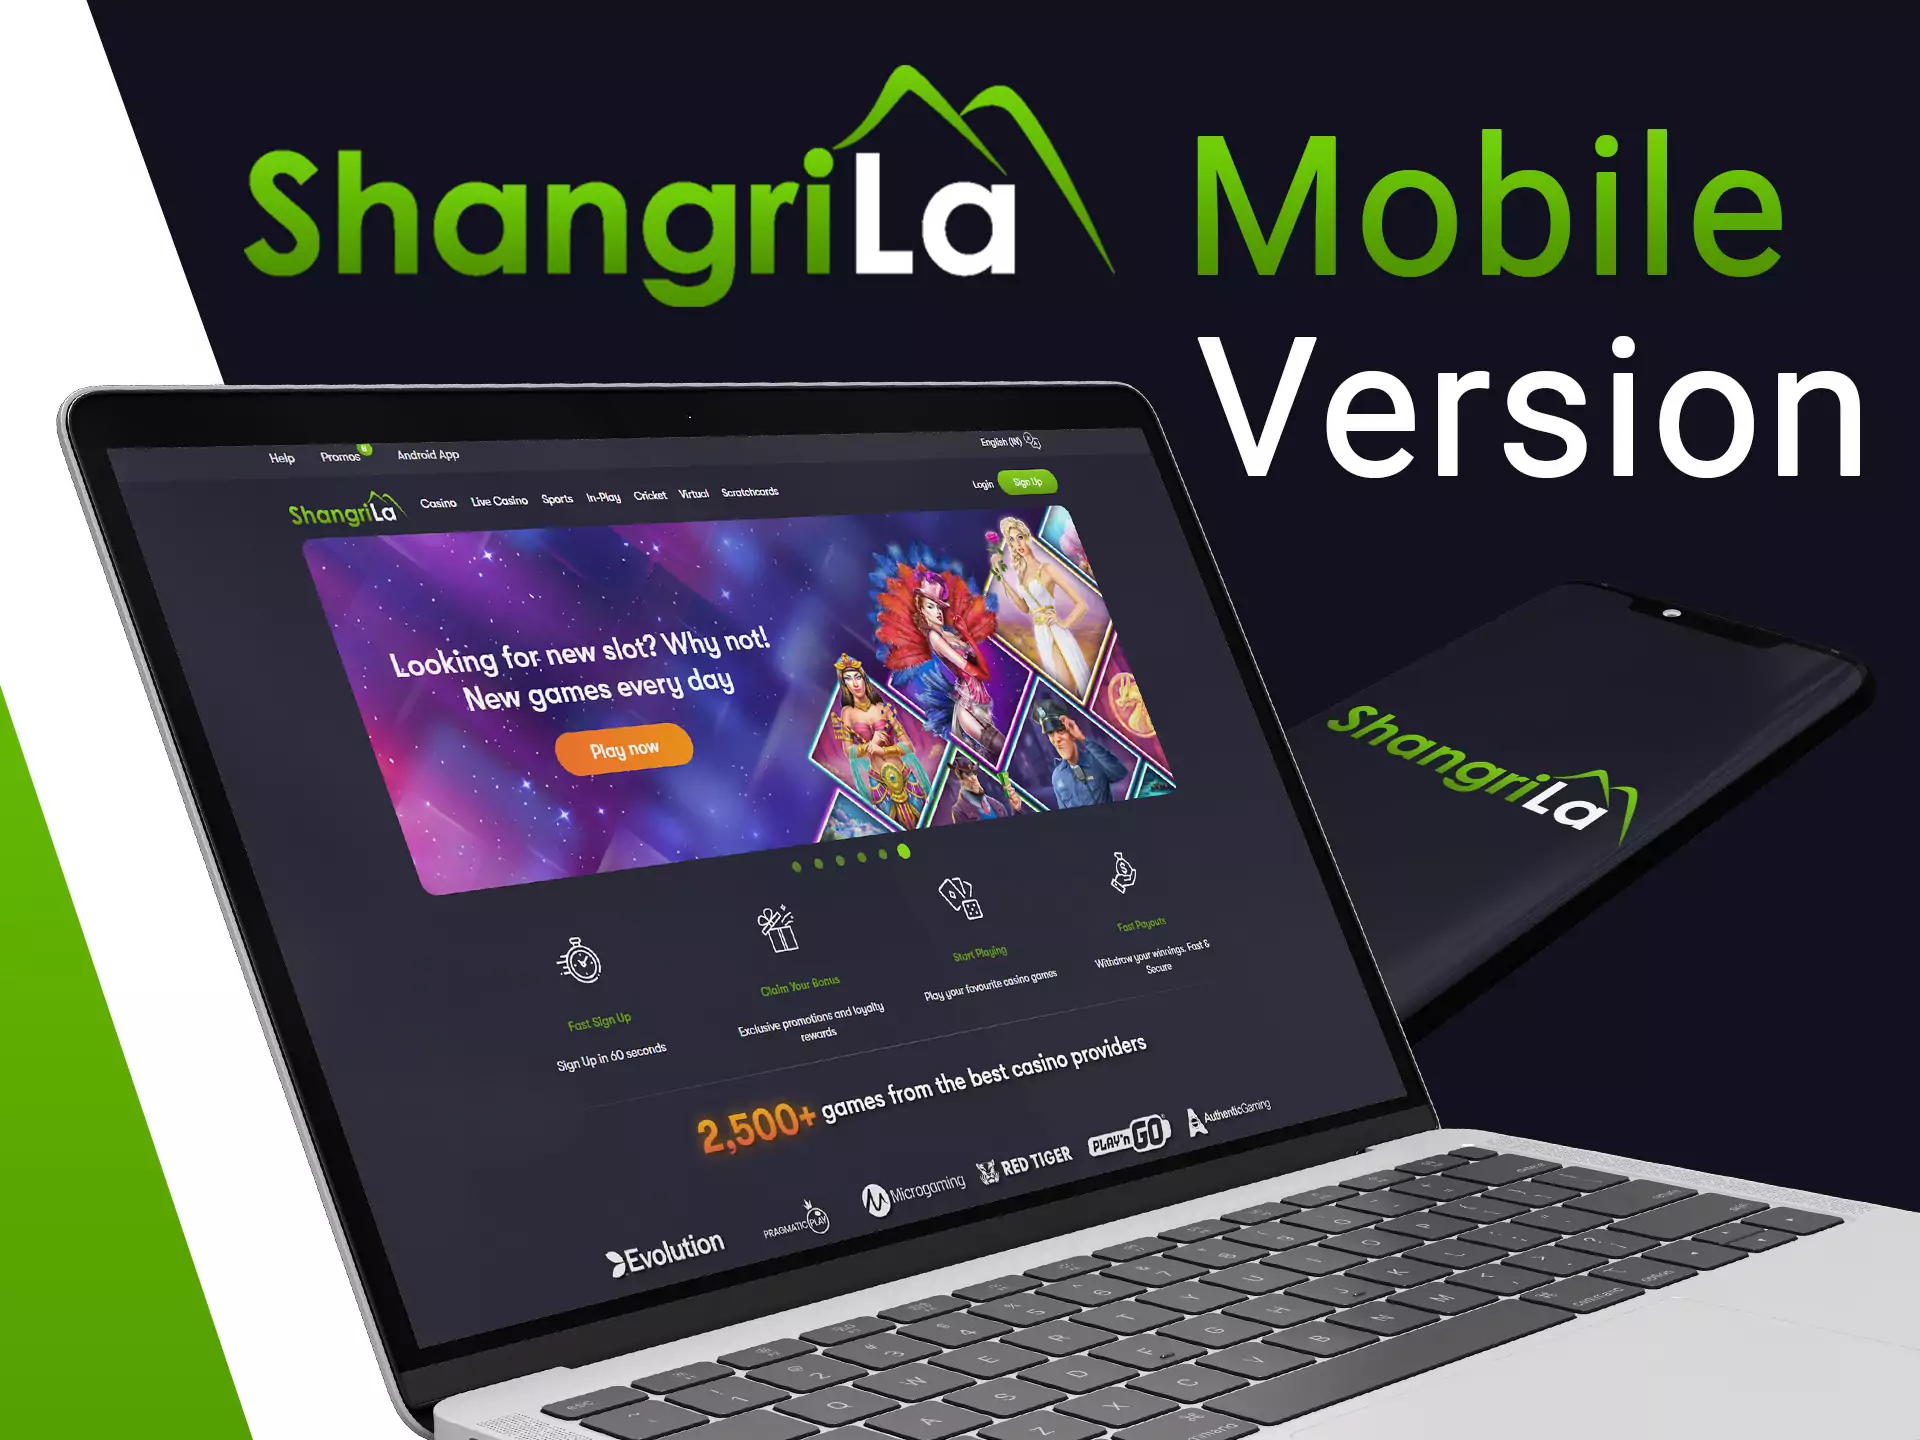 You can use Shangri La website on any device with internet on it.